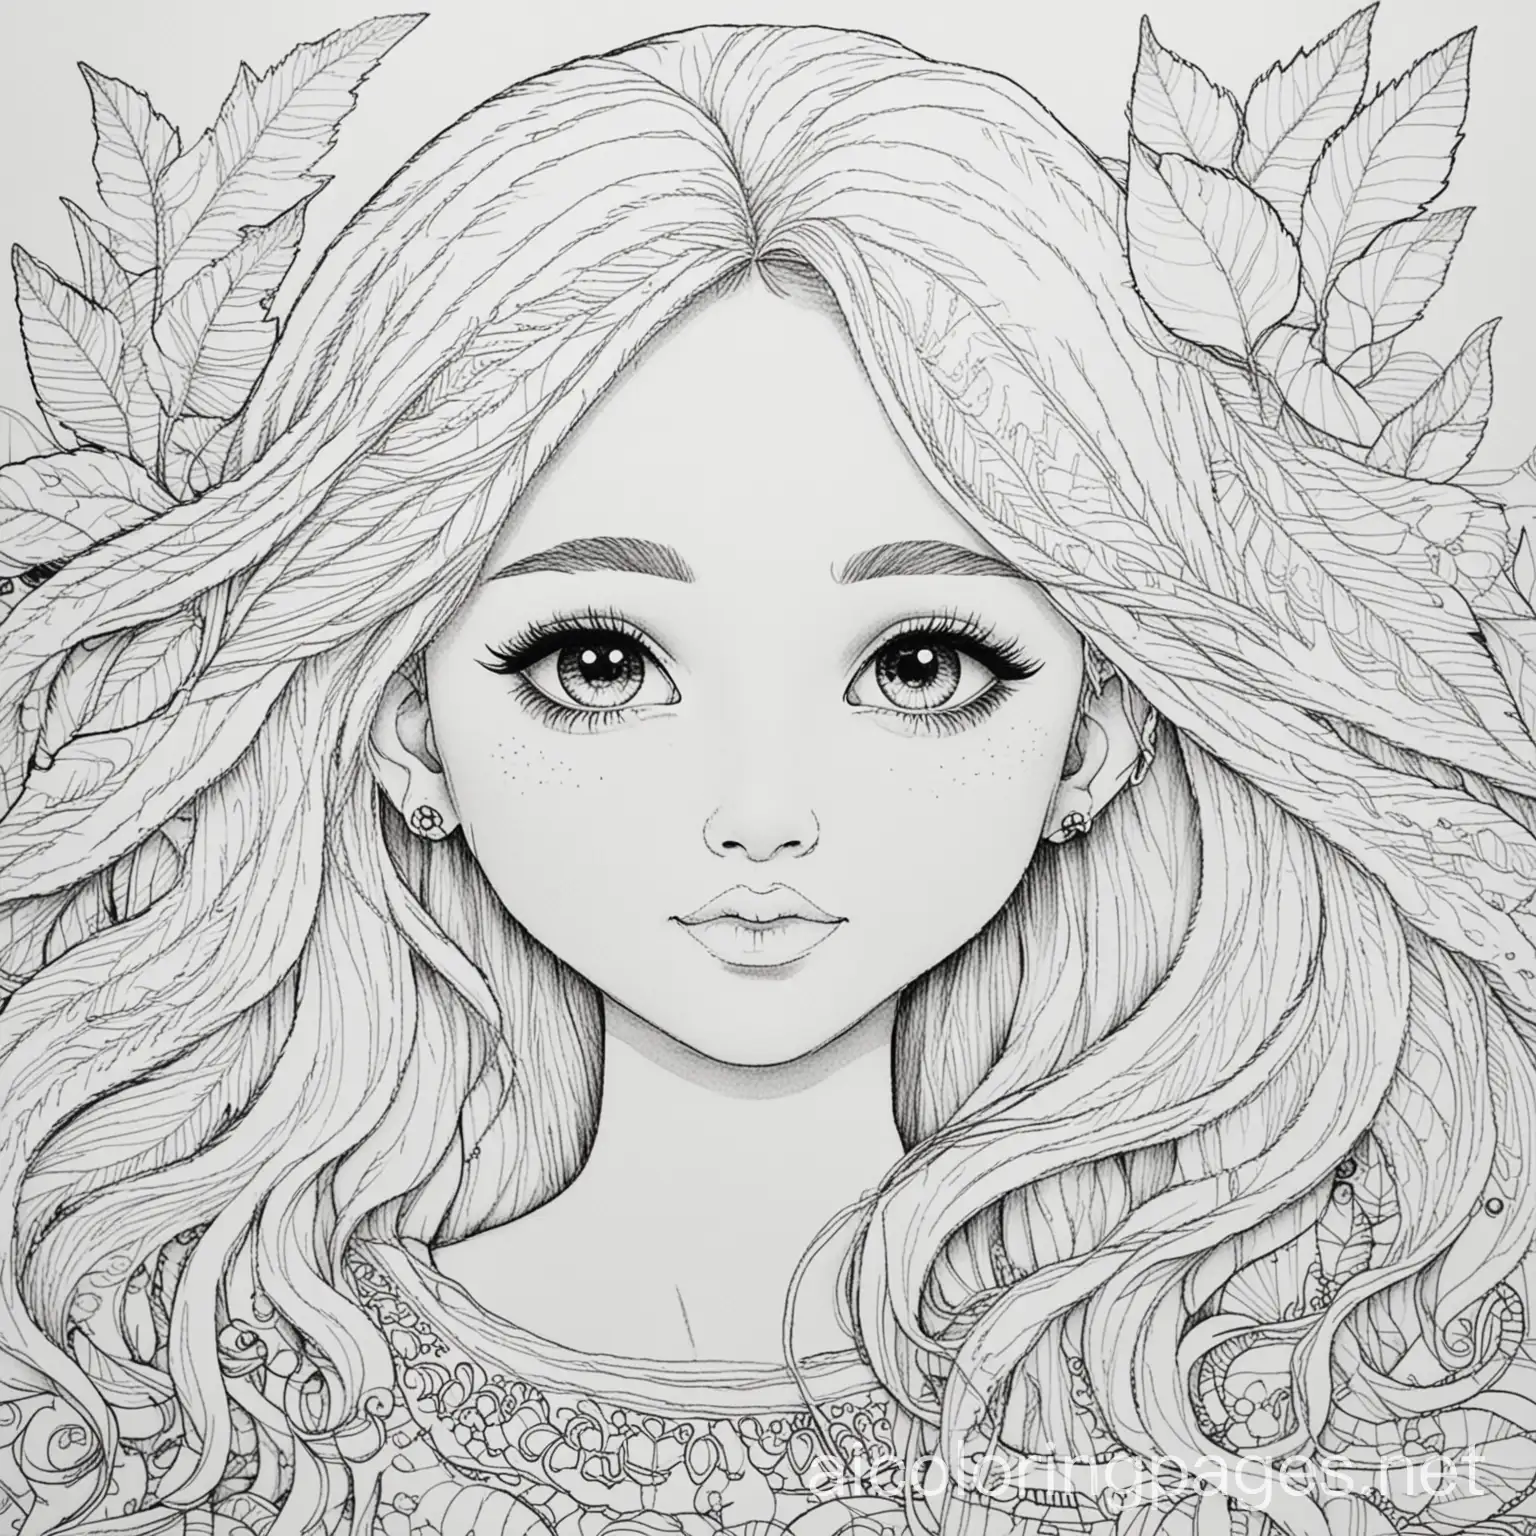 adult coloring pages, Coloring Page, black and white, line art, white background, Simplicity, Ample White Space. The background of the coloring page is plain white to make it easy for young children to color within the lines. The outlines of all the subjects are easy to distinguish, making it simple for kids to color without too much difficulty